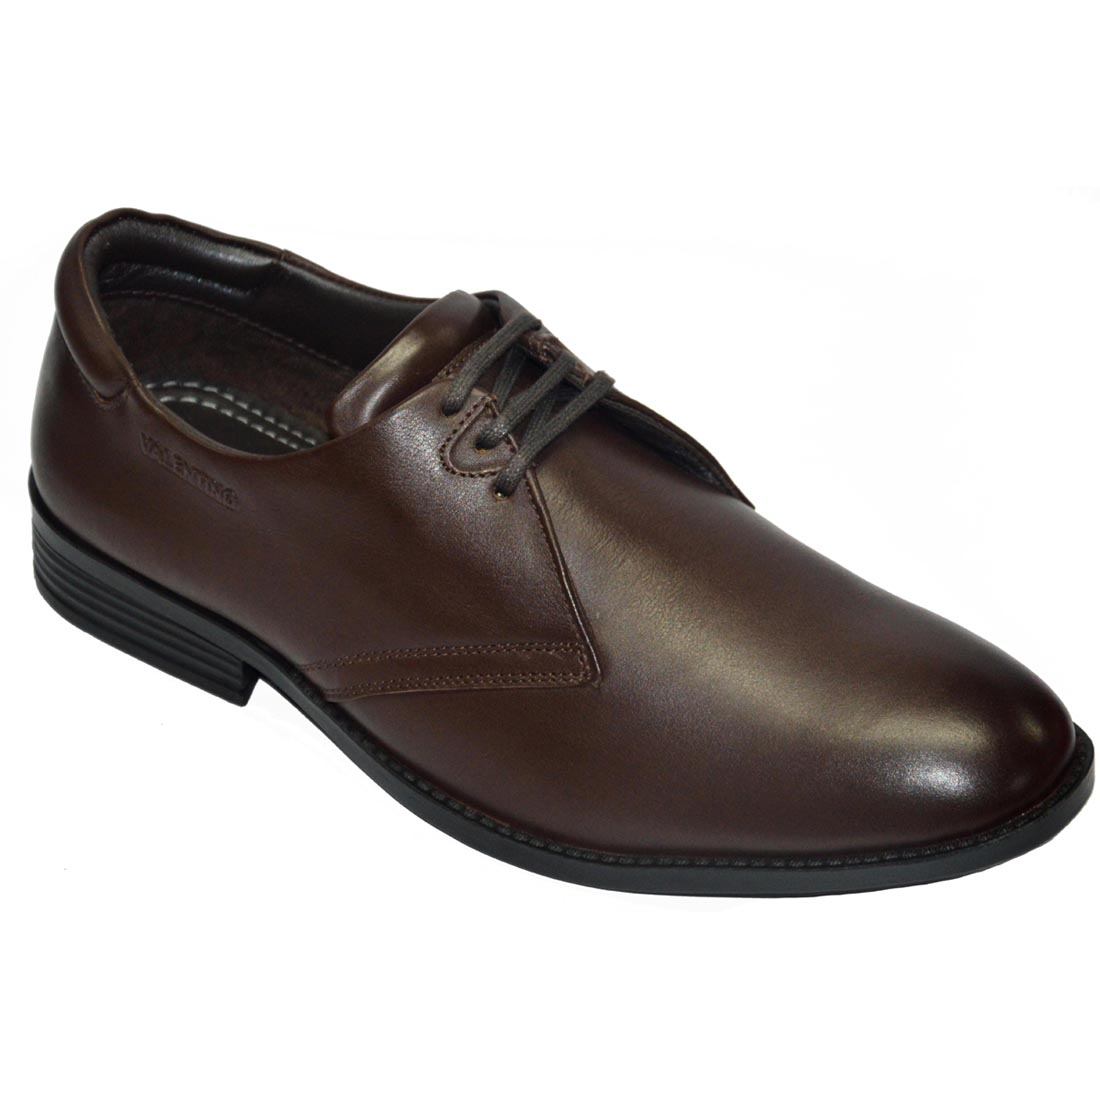 AMAZONA-50A MEN LEATHER BROWN FORMAL LACE UP DERBY